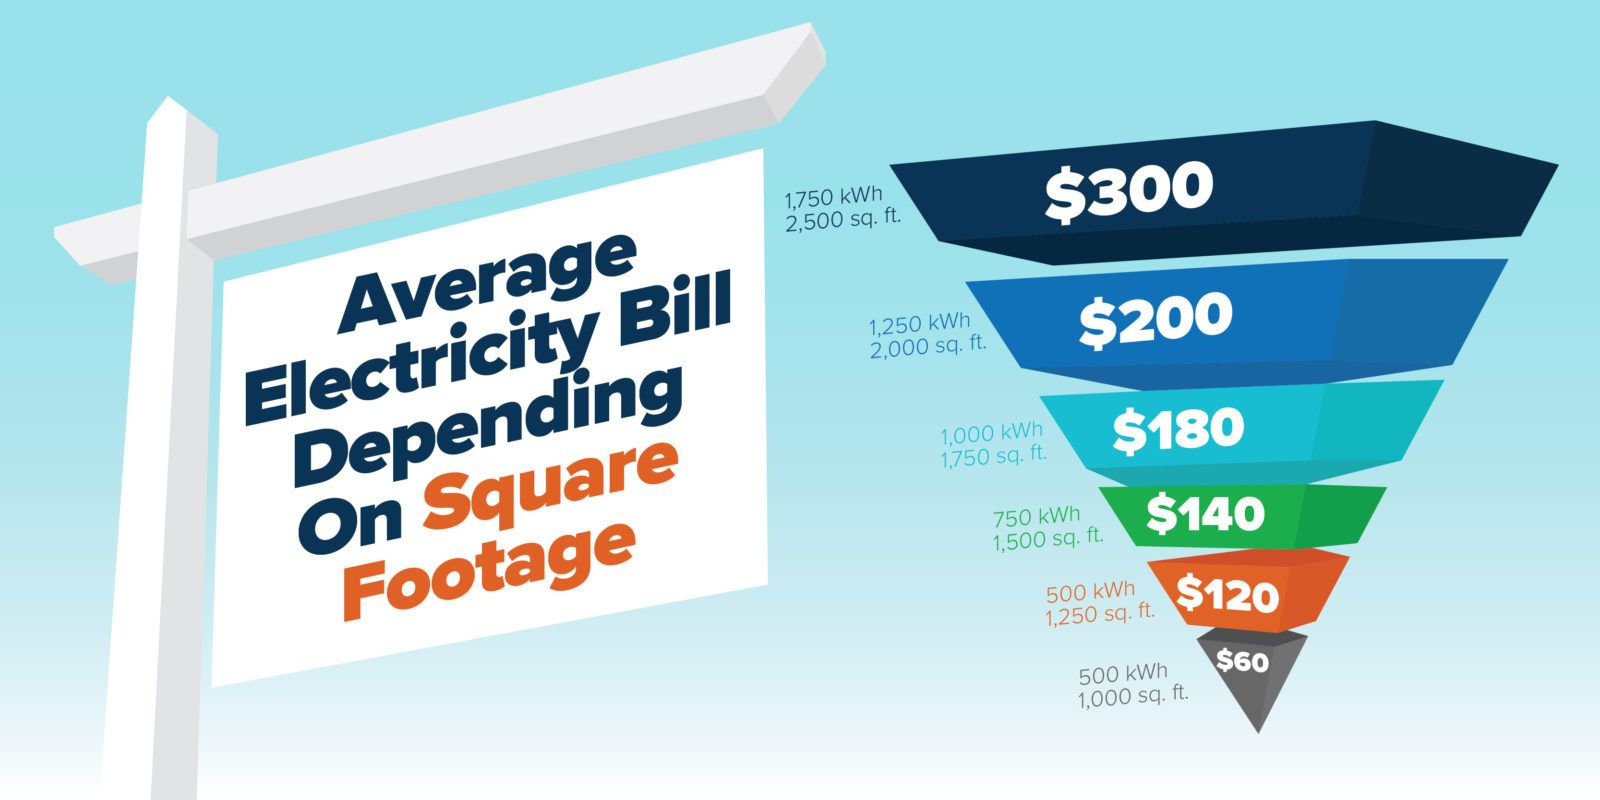 Average Electricity Bill Depending on Square Footage